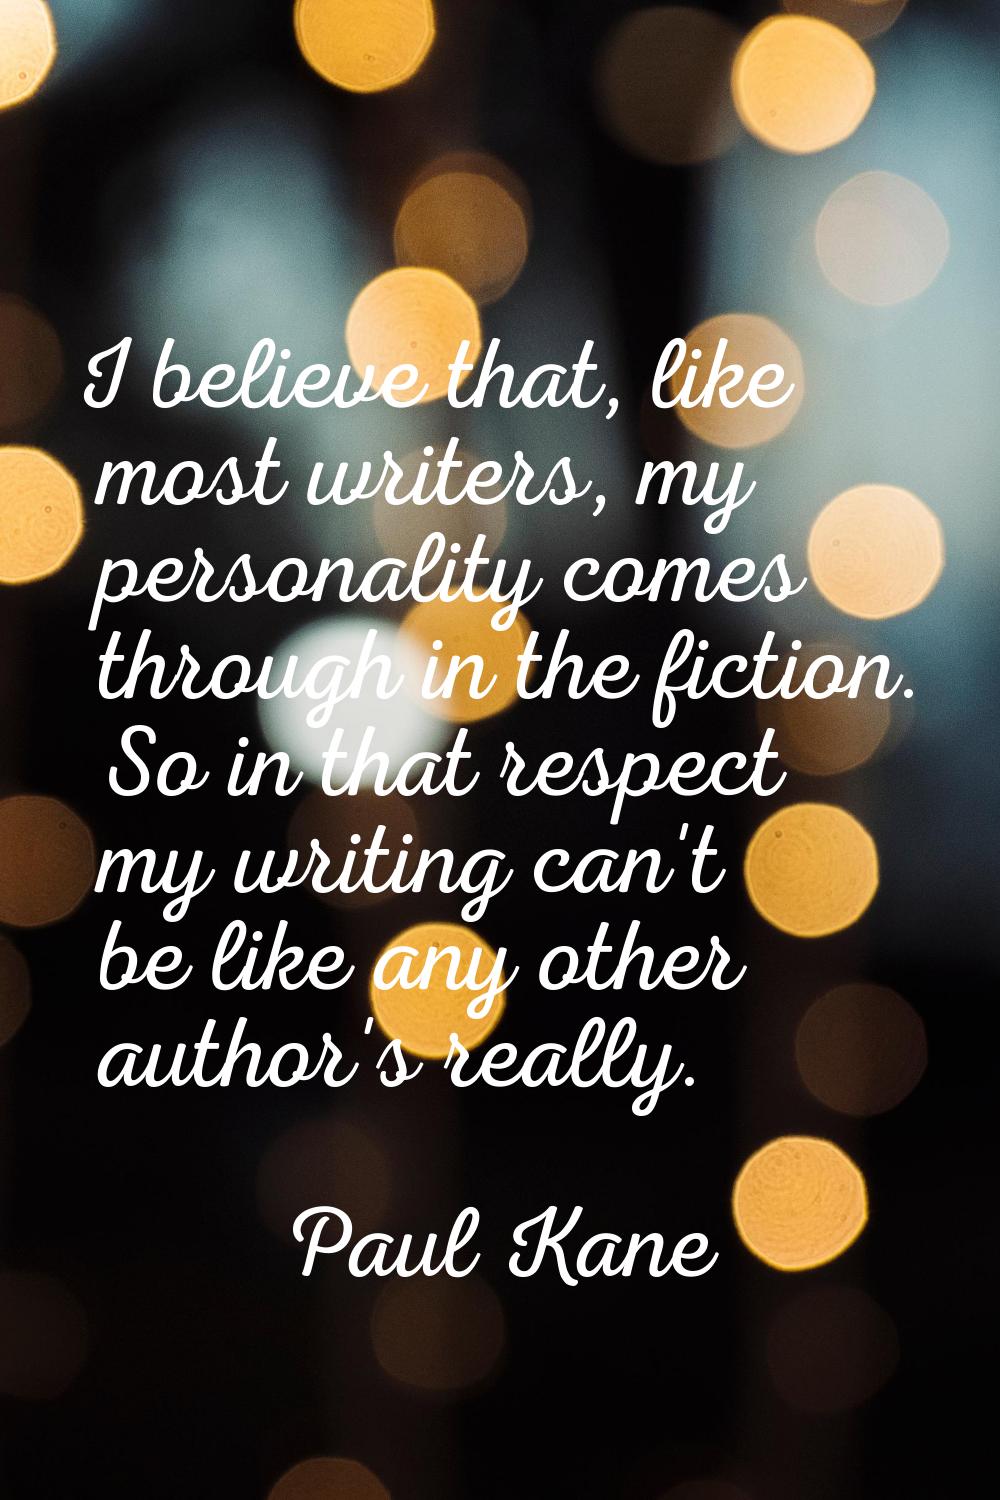 I believe that, like most writers, my personality comes through in the fiction. So in that respect 